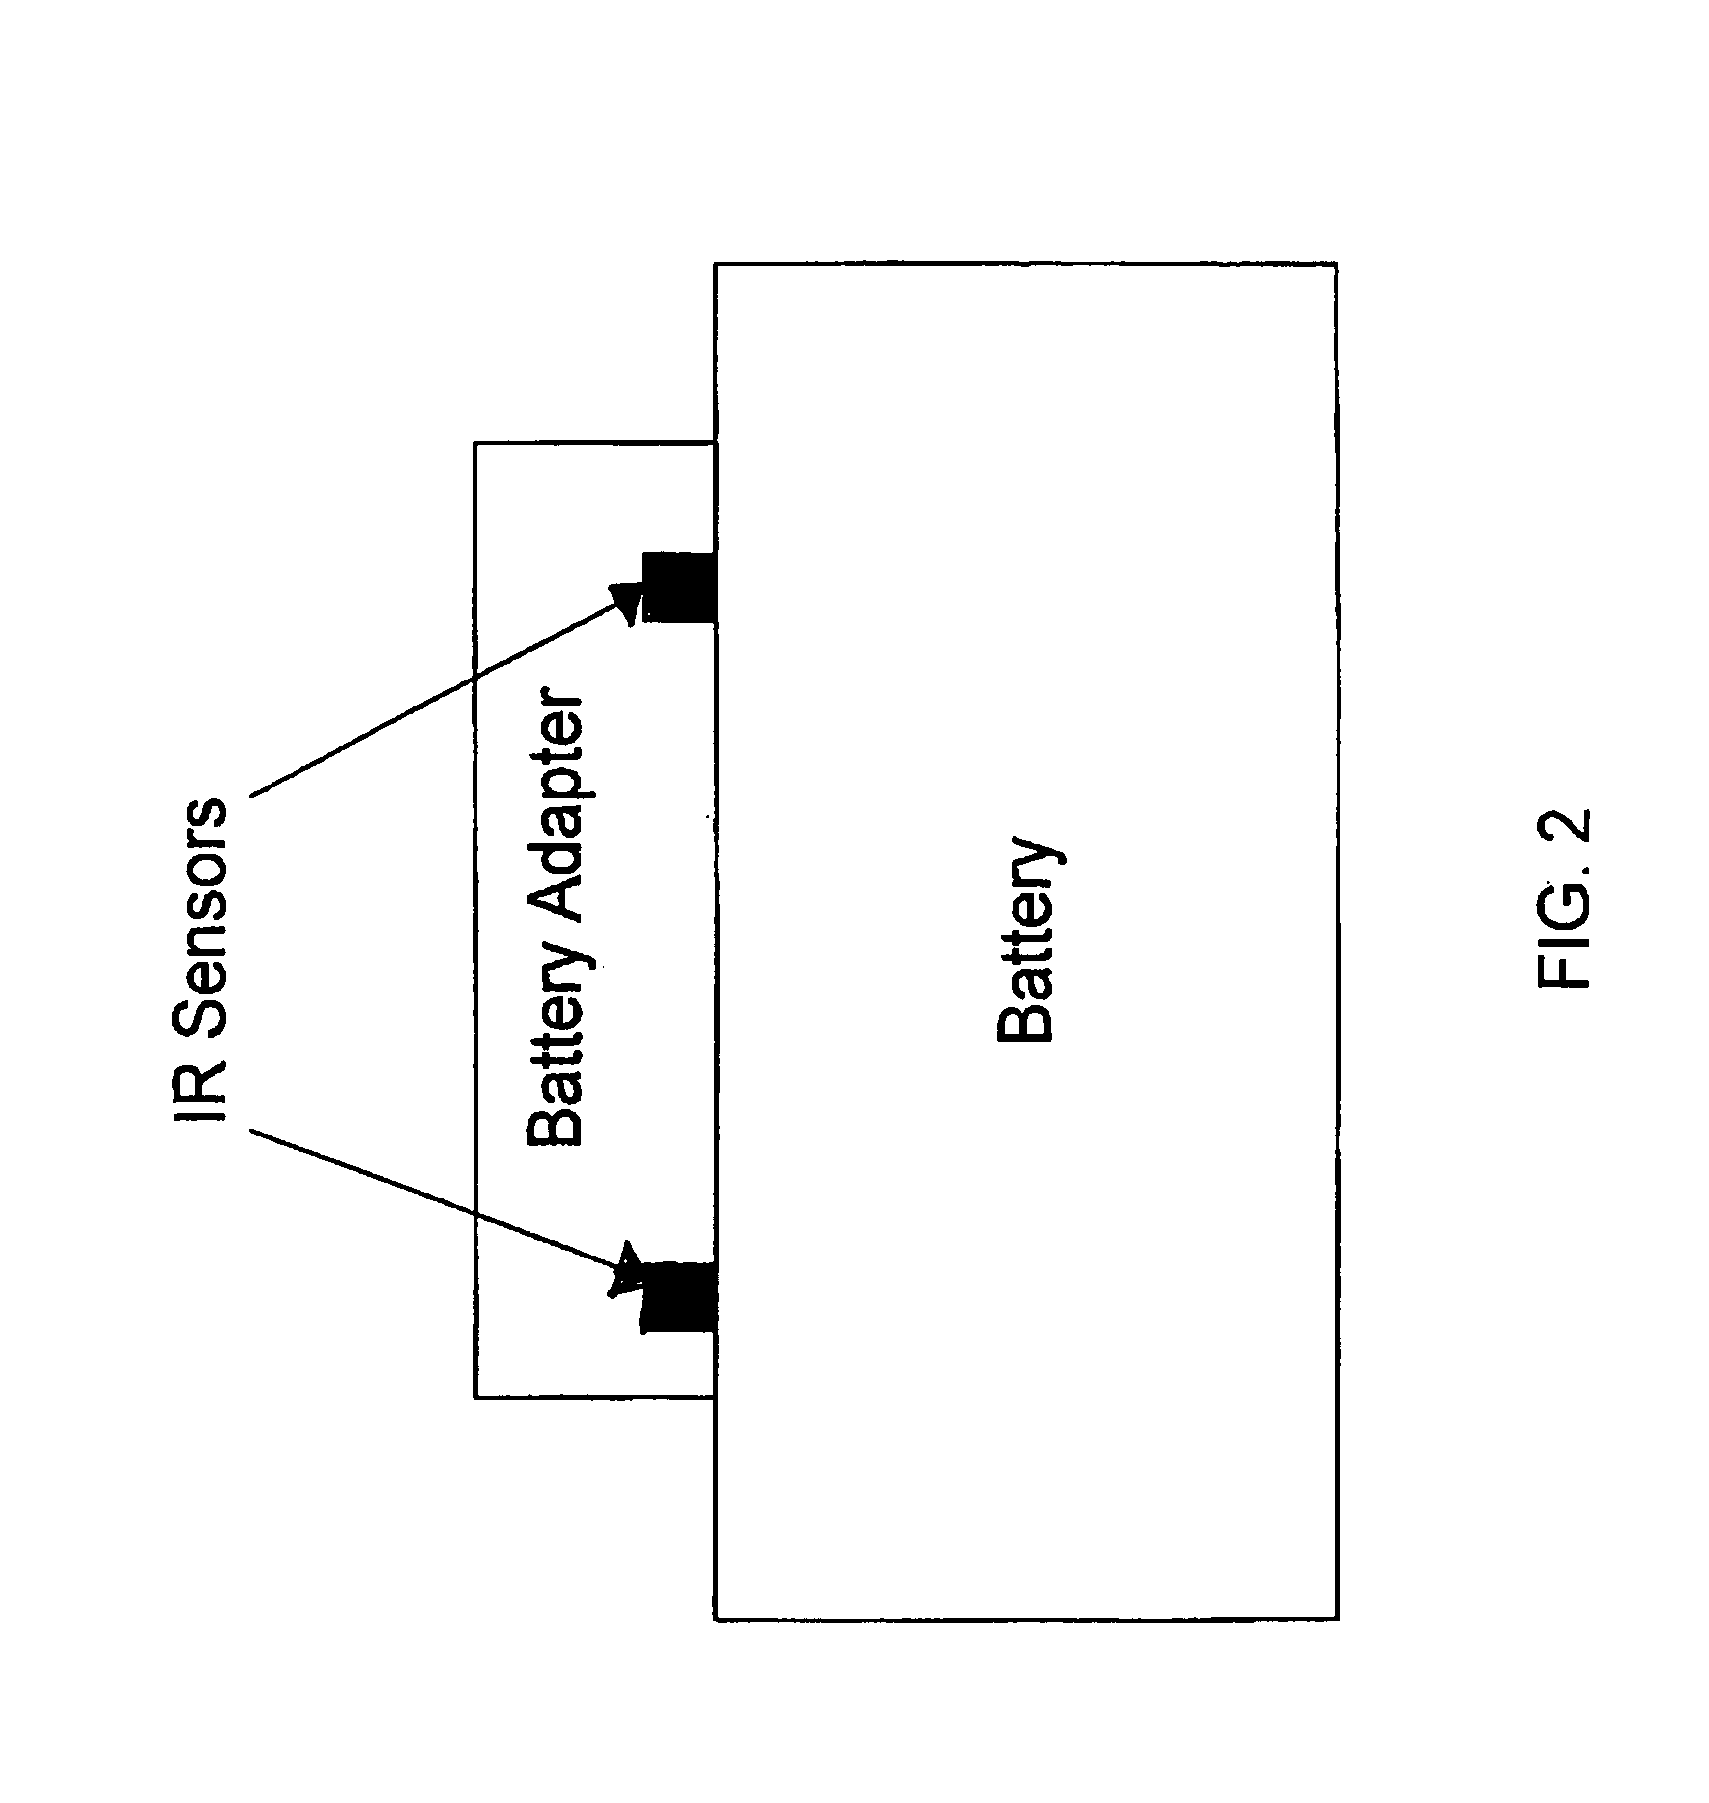 Method and apparatus for acquiring battery temperature measurements using stereographic or single sensor thermal imaging